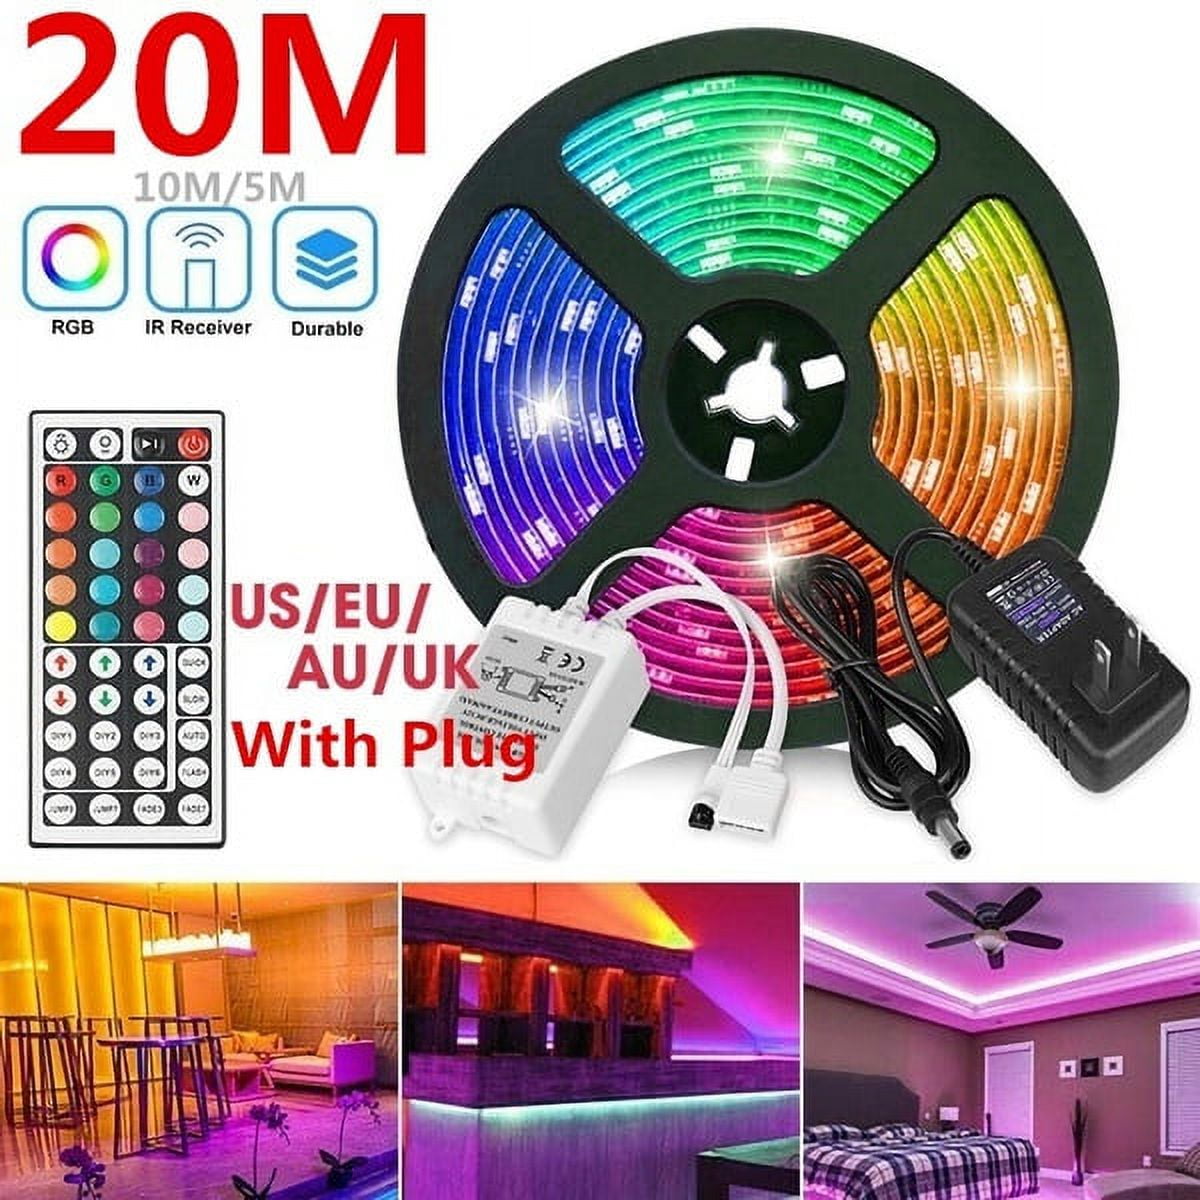 LED Strip Lights Kit,Led Light Strip 20m/15m/10m/5m SMD 2835  1200/900/600/300 LEDs,with IR Remote Controller for  Home,Kitchen,Party,Christmas 